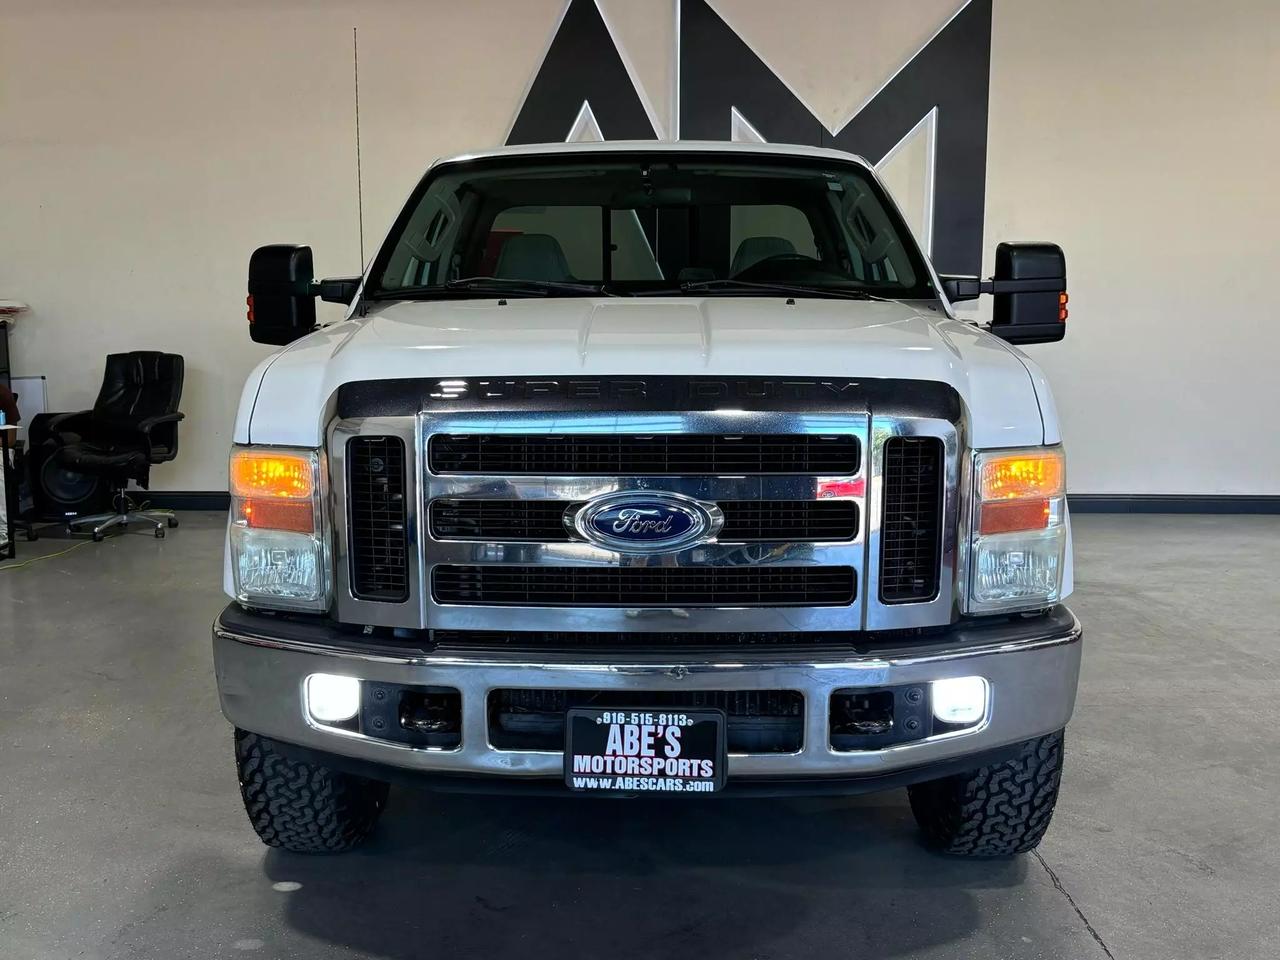 Used 2008 Ford F-250 Super Duty XLT with VIN 1FTSX21R08EB62769 for sale in Sacramento, CA